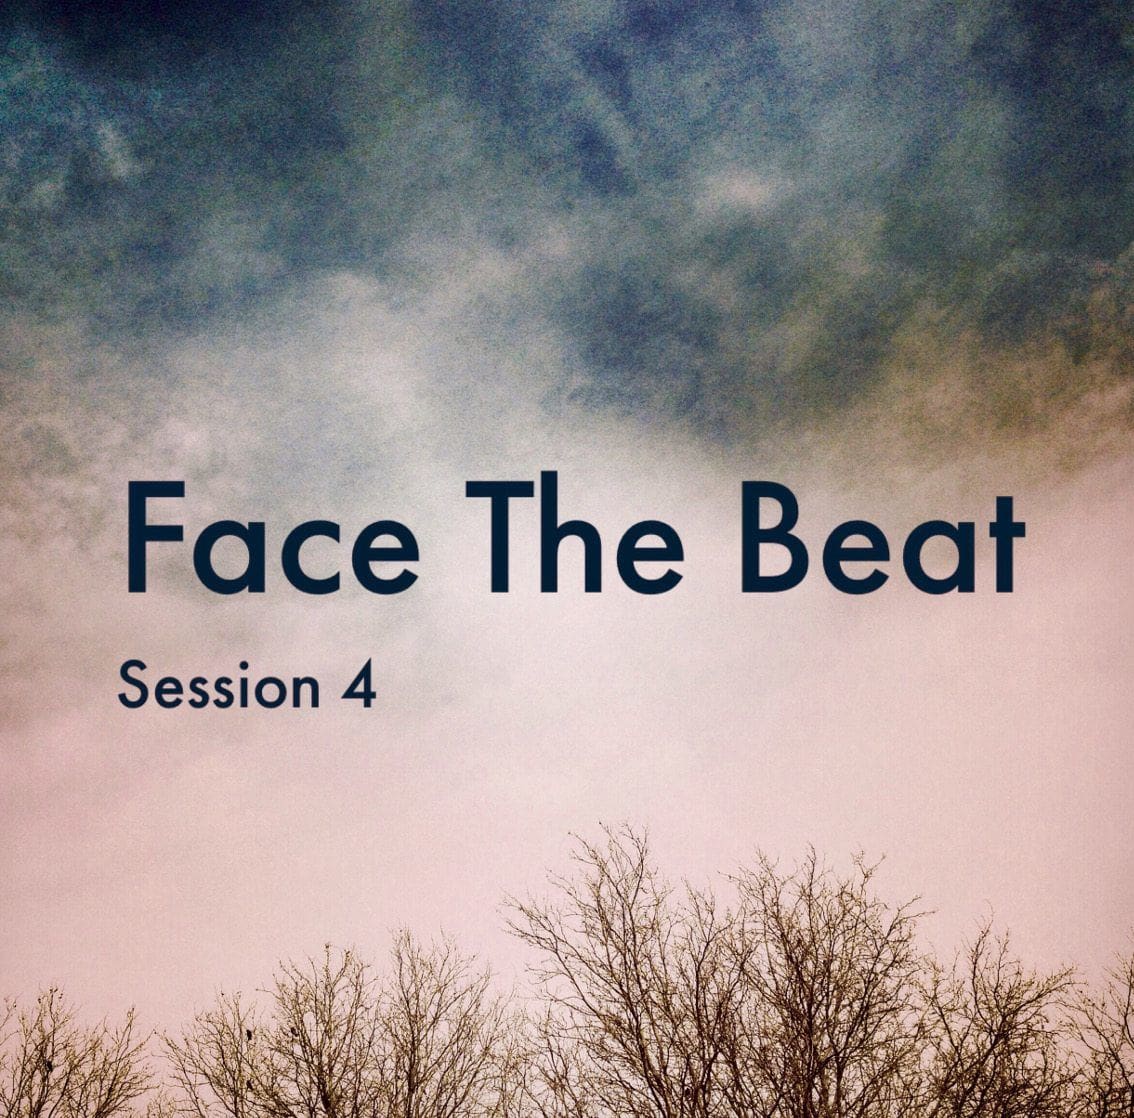 Free download mega-compilation 'Face The Beat: Session 4' is now available - 90 tracks from the absolute industrial underground!